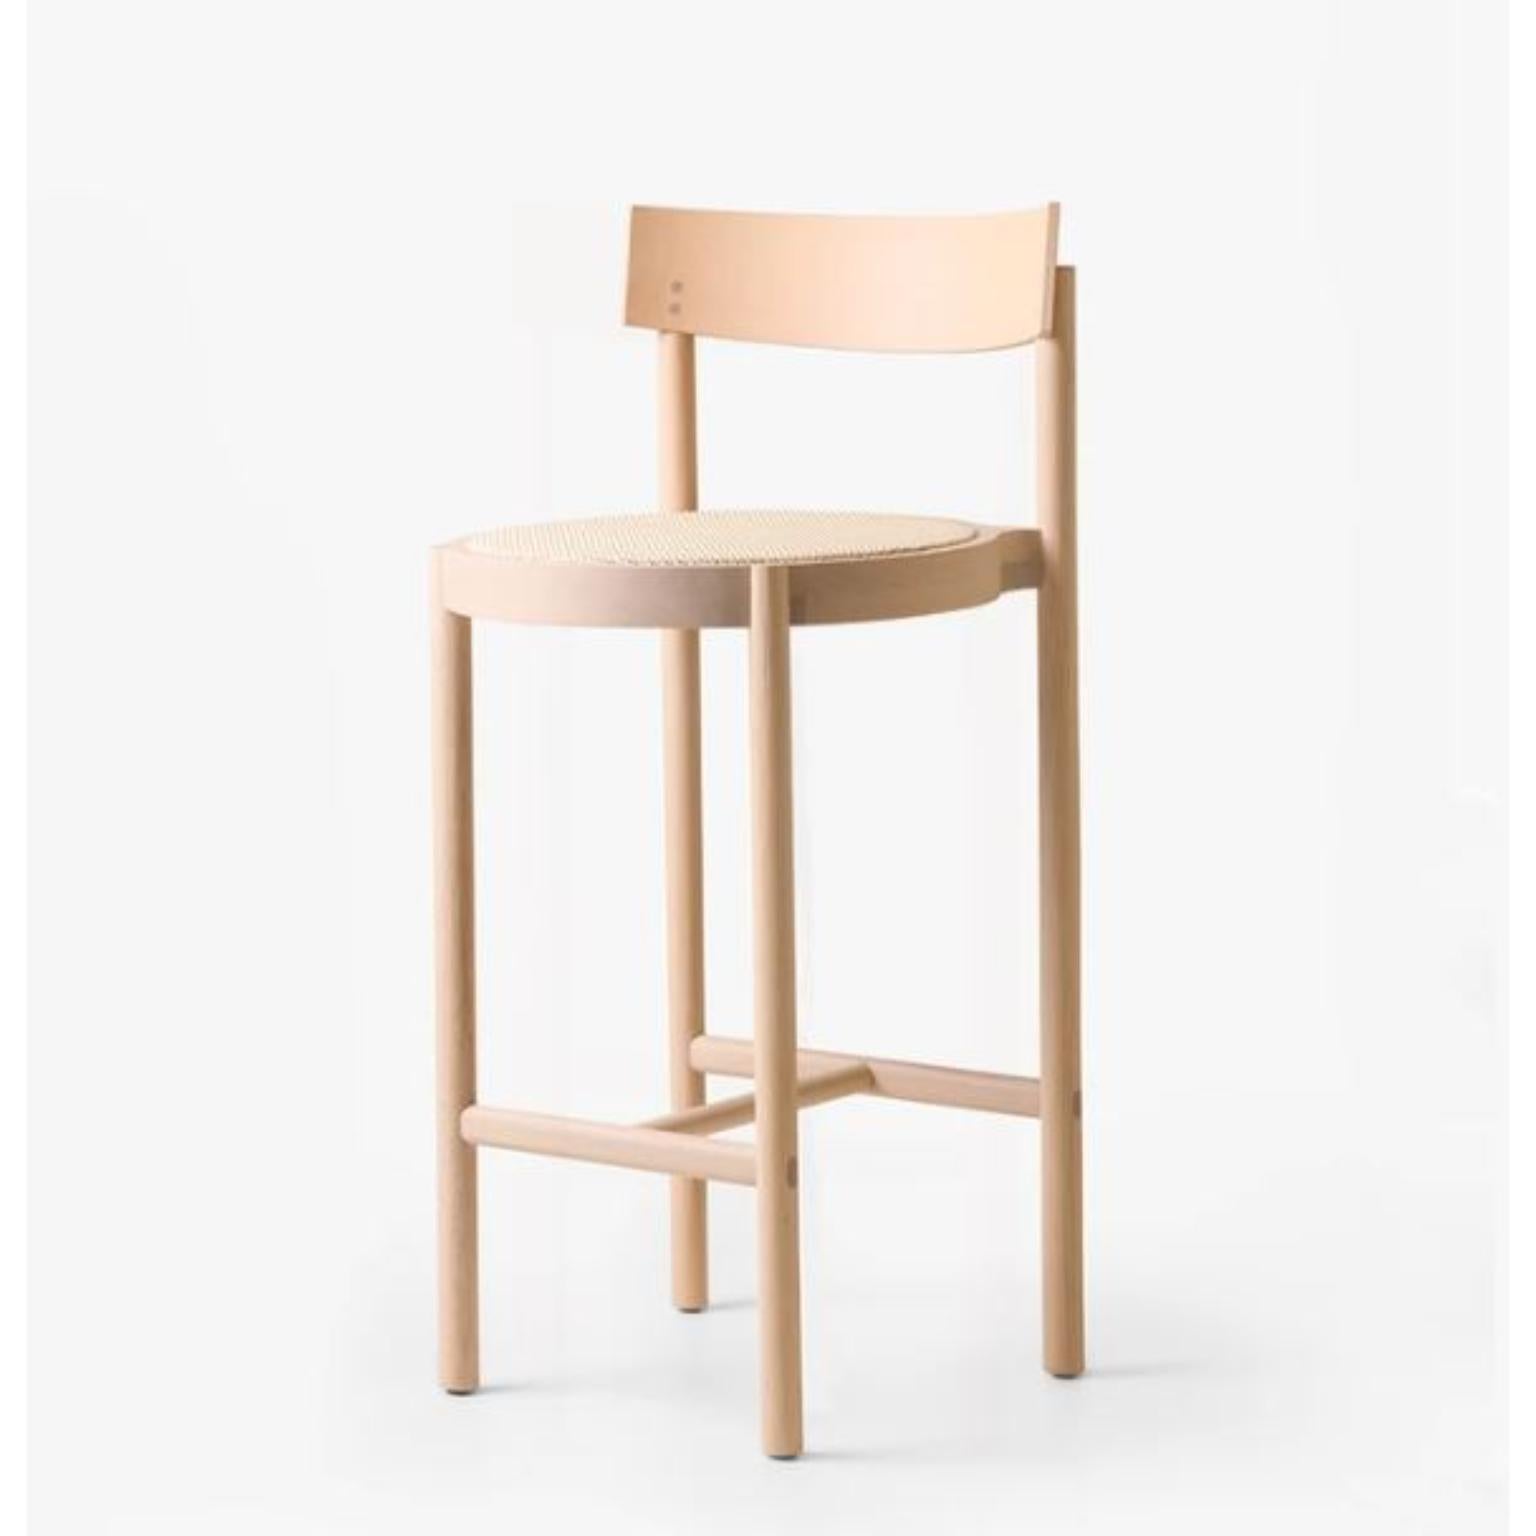 Bleached Tauari Gravatá Counter Stool by Wentz
Dimensions: D 52 x W 47 x H 90 cm
Materials: Tauari Wood, Cane/Upholstery.
Weight: 4,4kg / 9,7 lbs

The Gravatá series synthesizes our vision regarding the functional and visual simplicity of furniture.